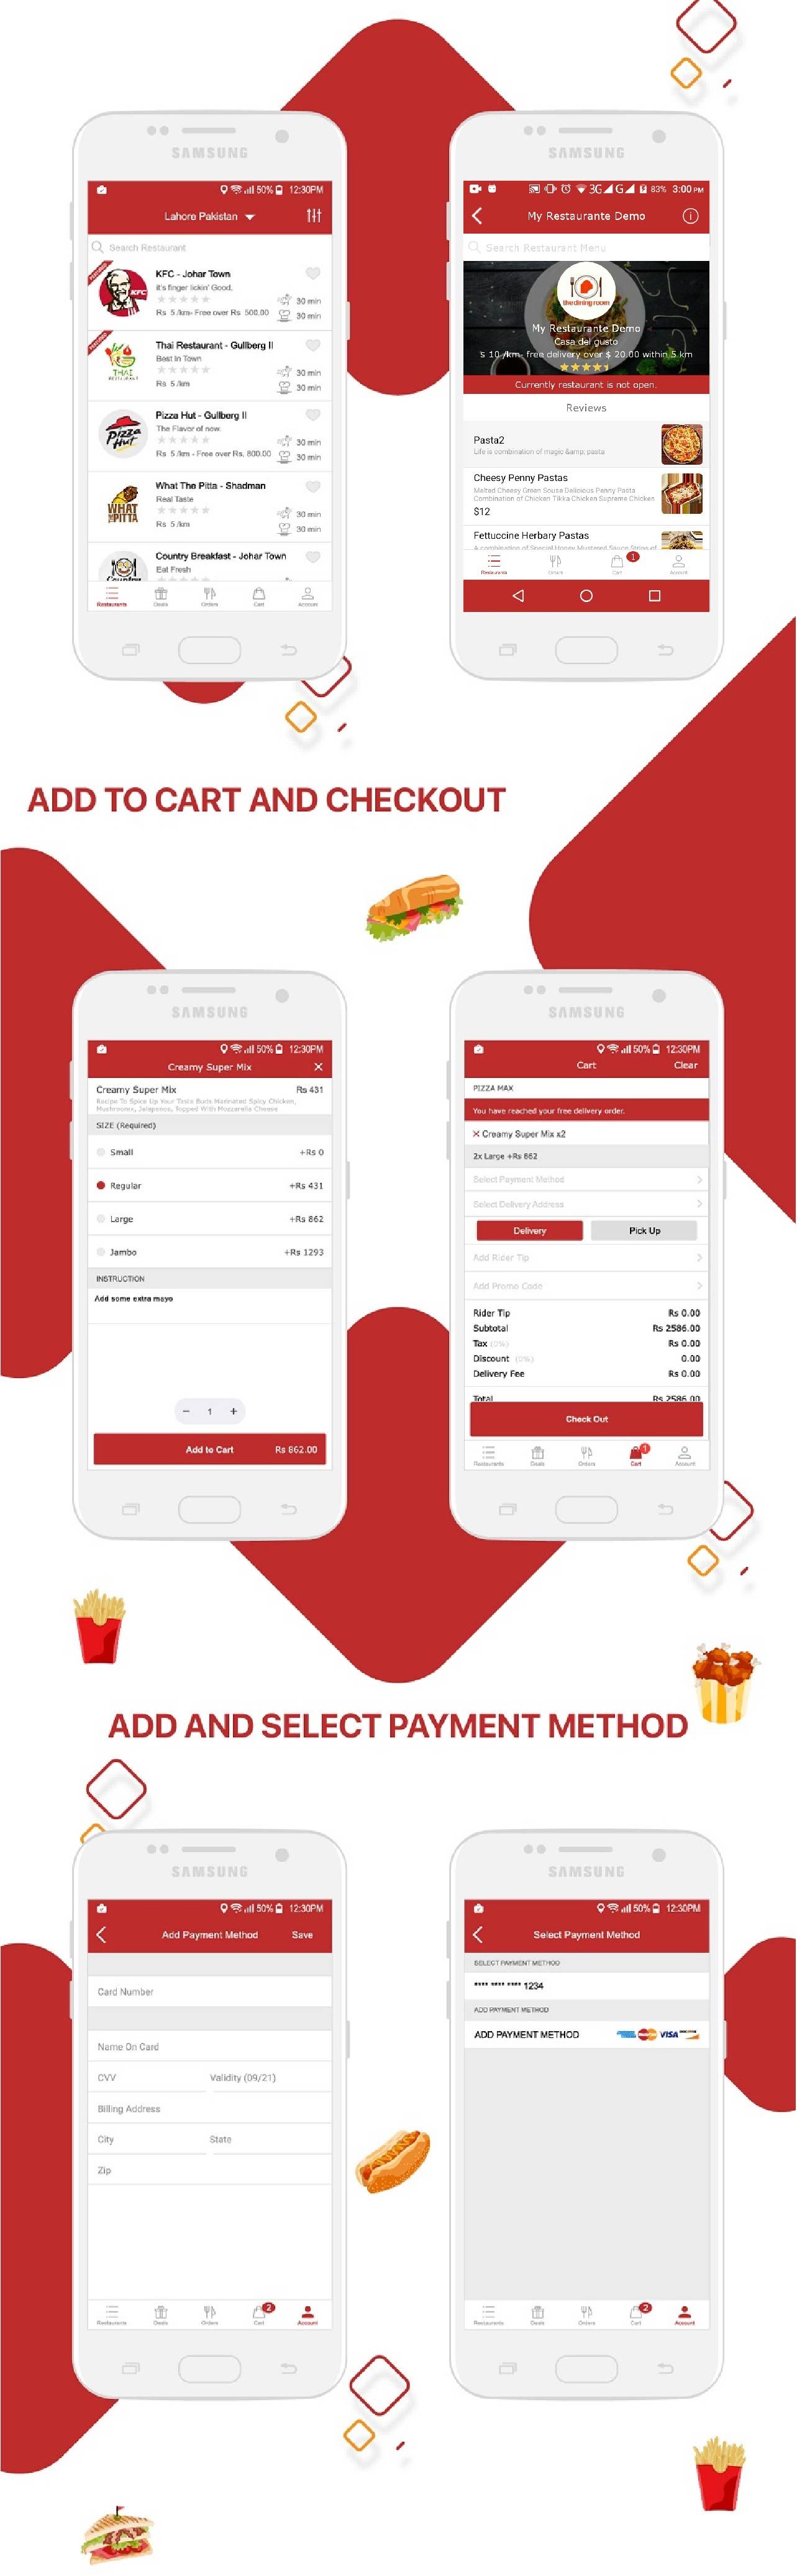 Native Restaurant Food Delivery & Ordering System With Delivery Boy - Android v2.0.9 - 14